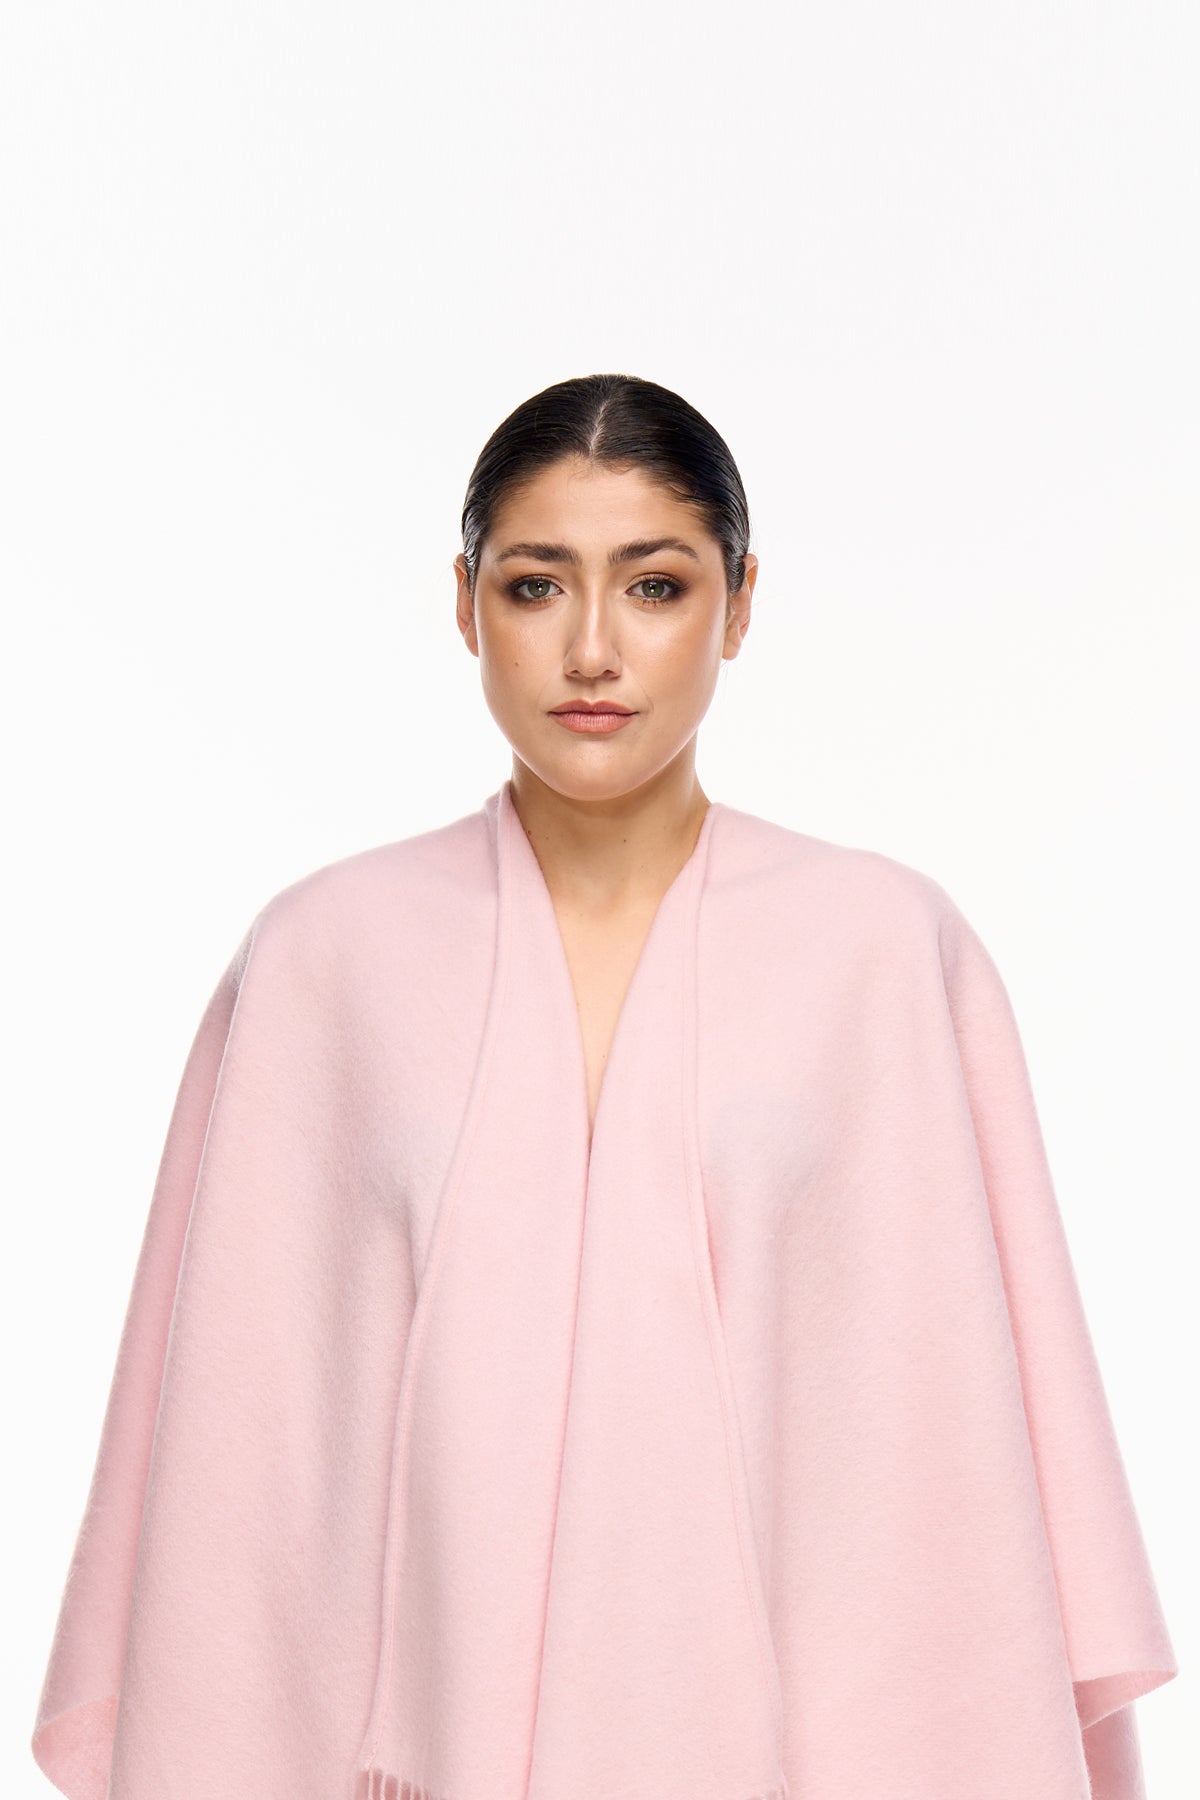 Plain Cape Light Pink Poncho 100% Pure Lambswool